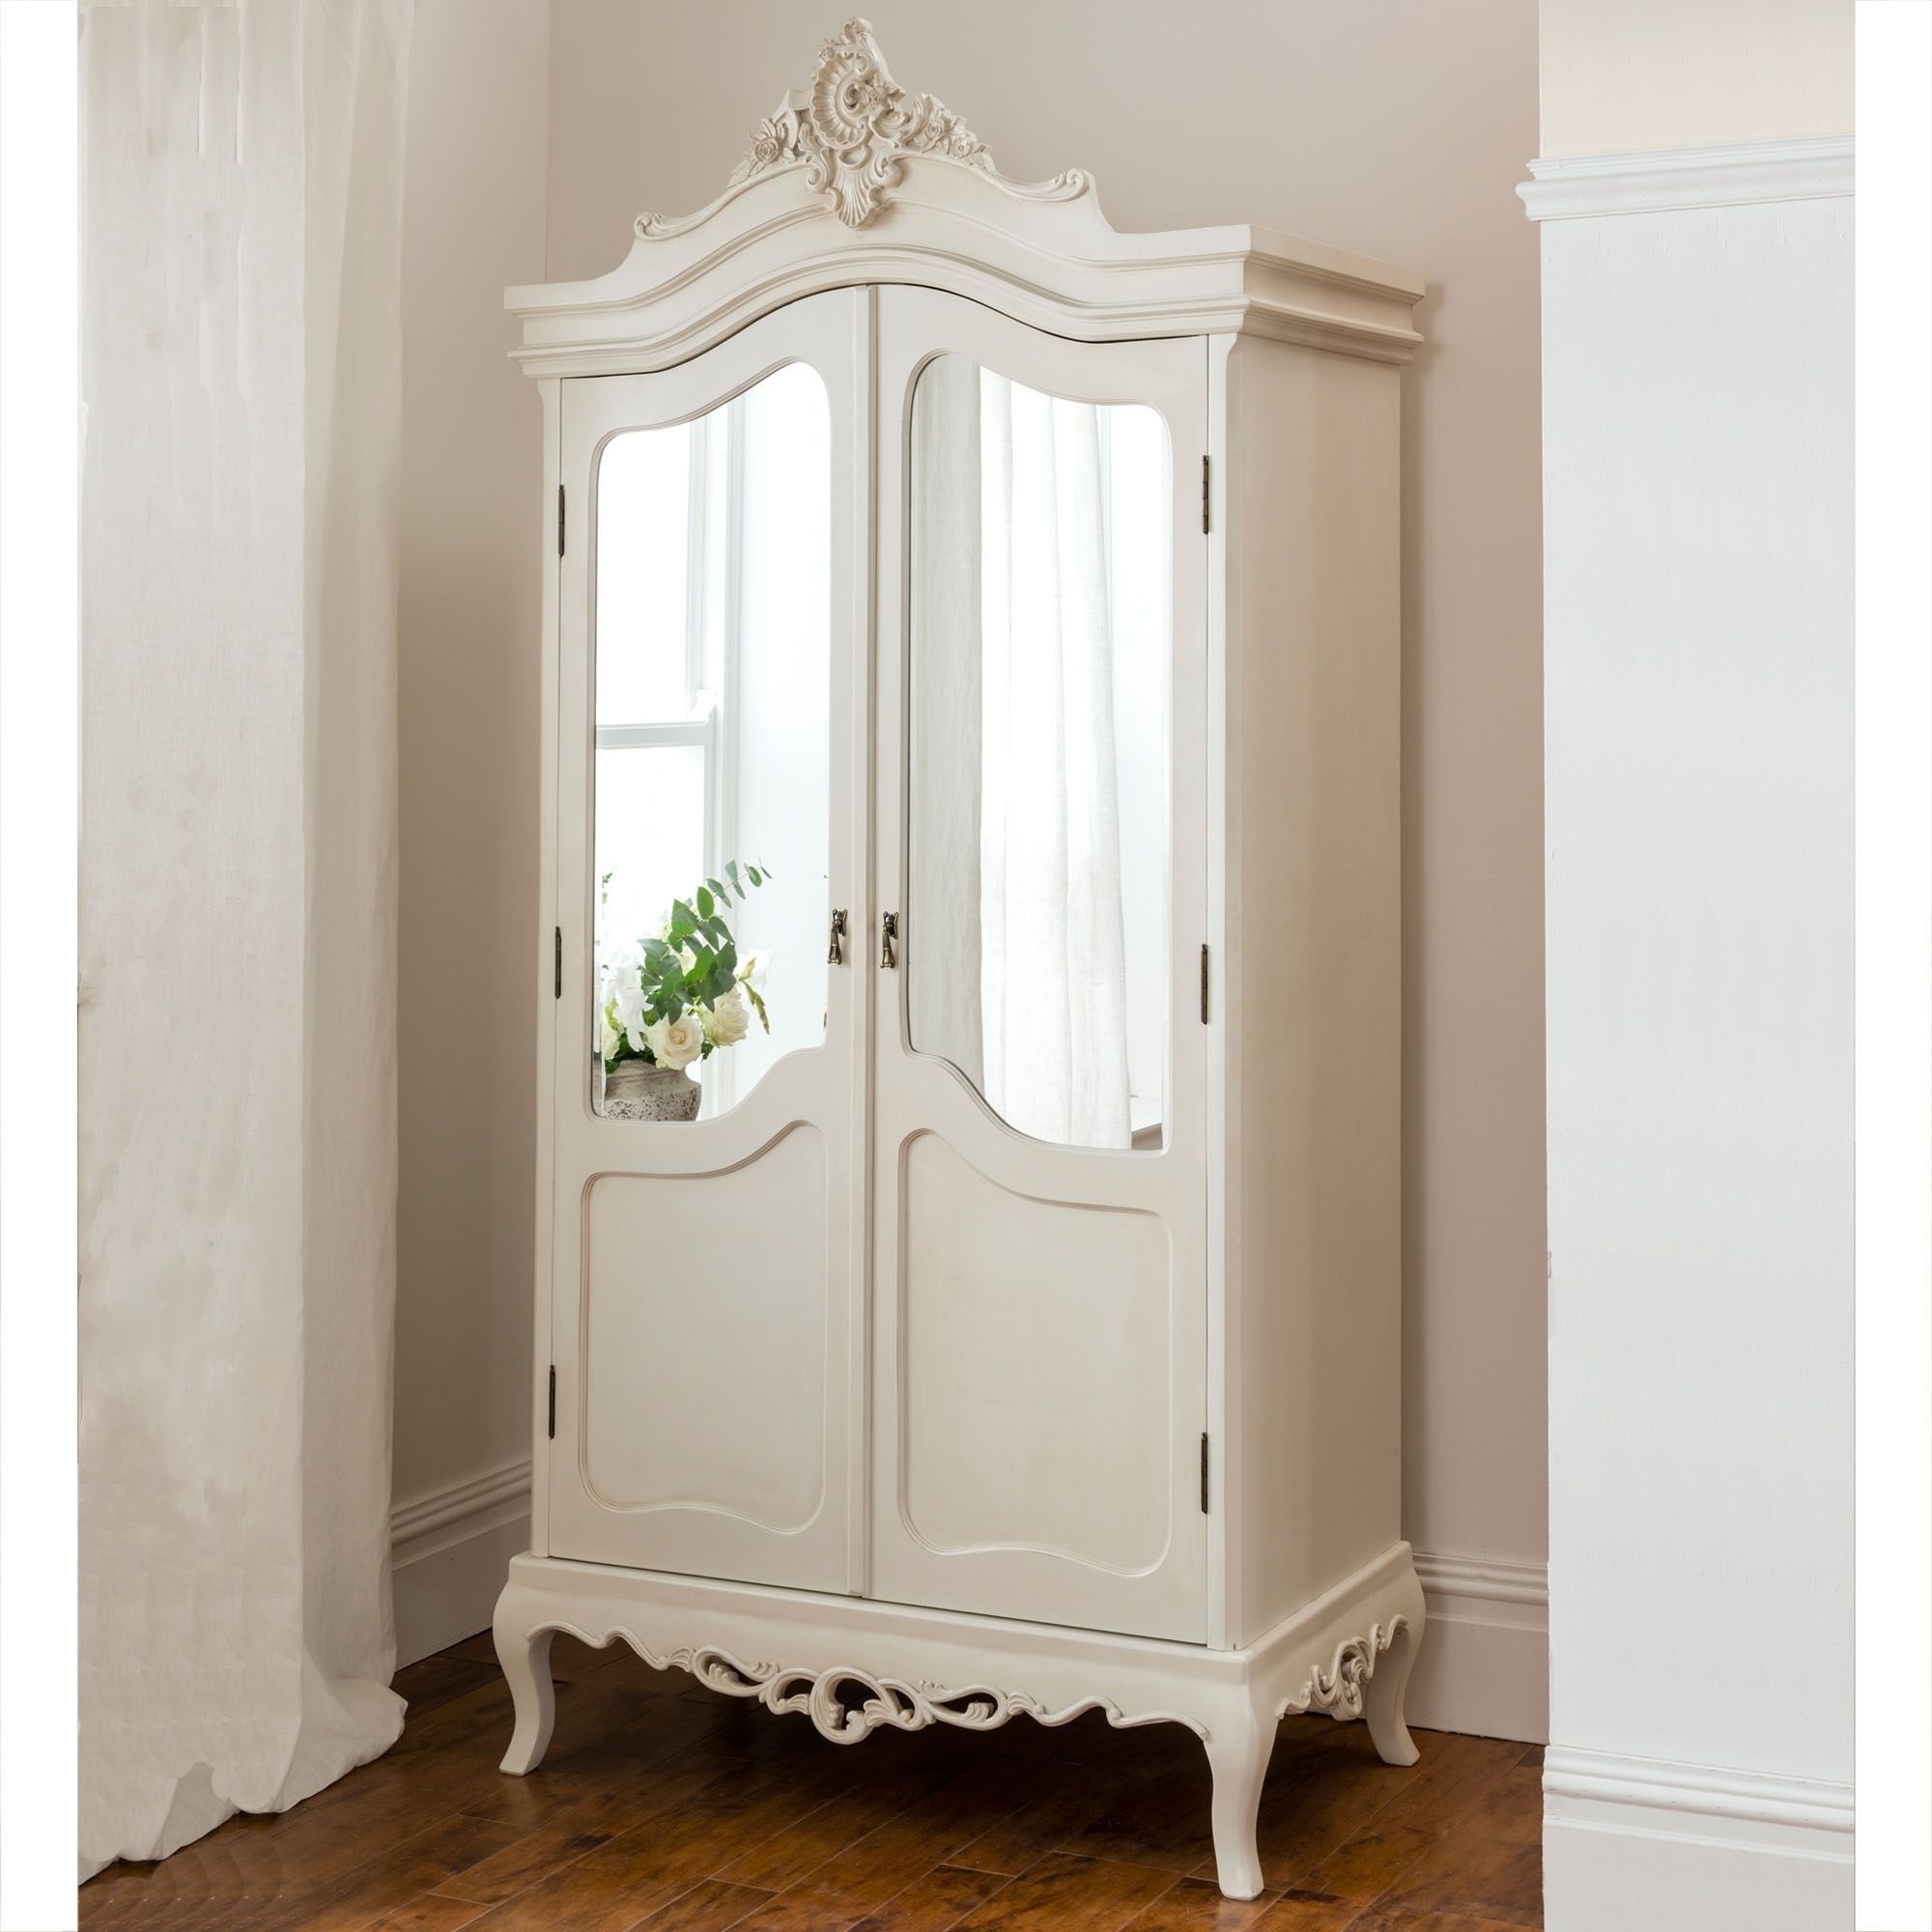 Annaelle Antique French Wardrobe Inside White French Style Wardrobes (Gallery 17 of 20)